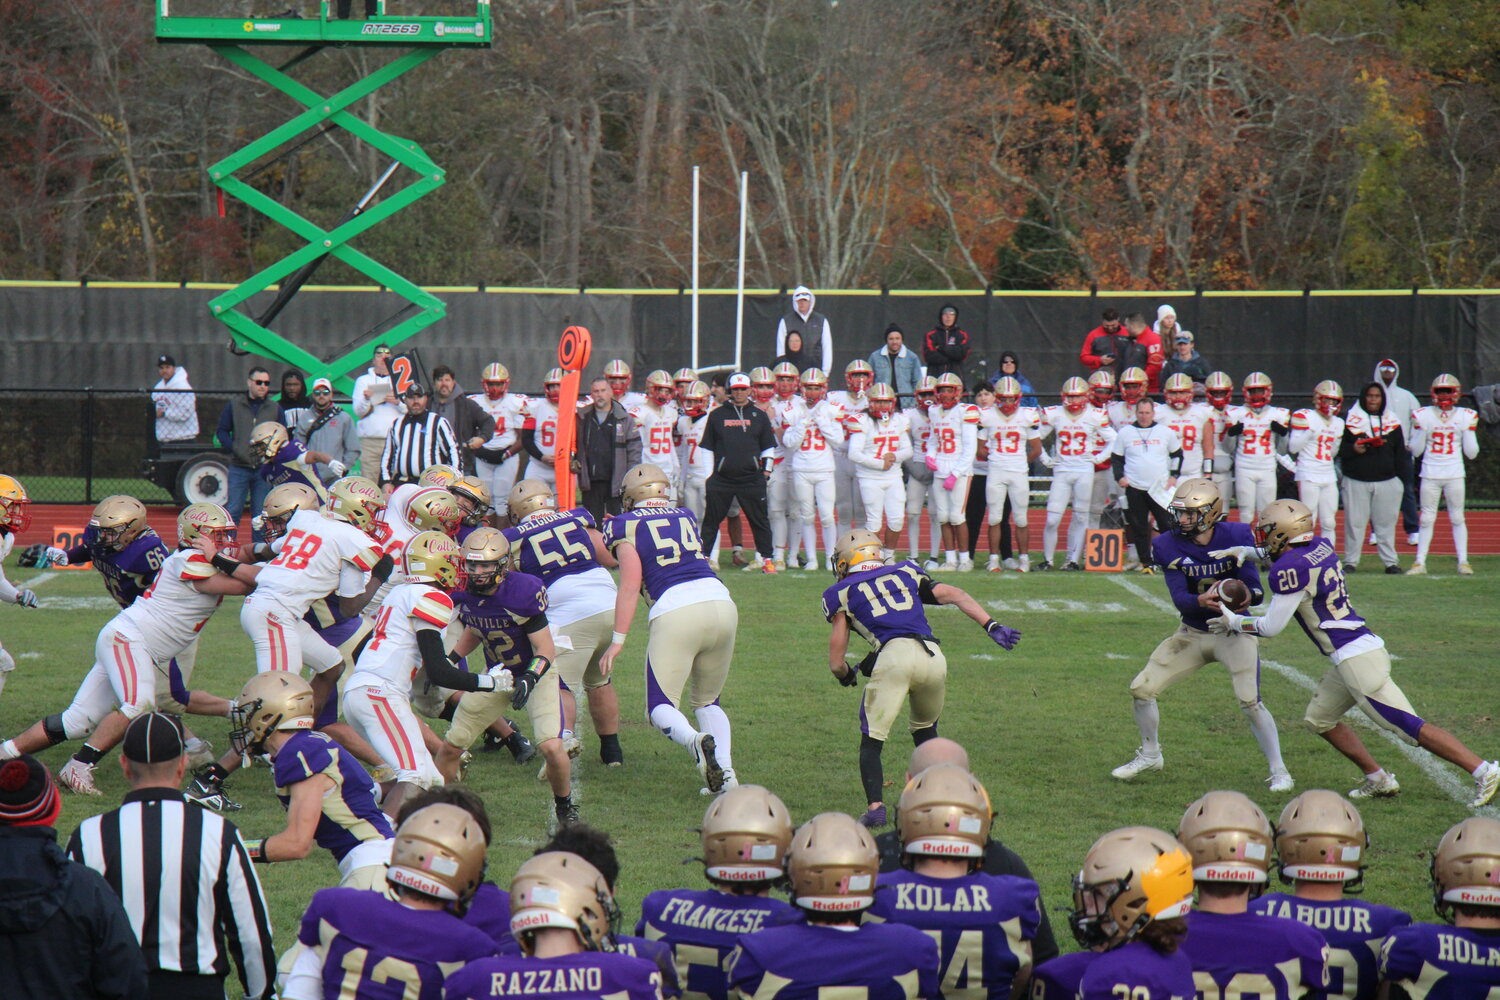 Scoring six touchdowns and getting all six extra points, the Sayville Golden Flashes put up a high score for their semifinal victory against Half Hollow Hills West.